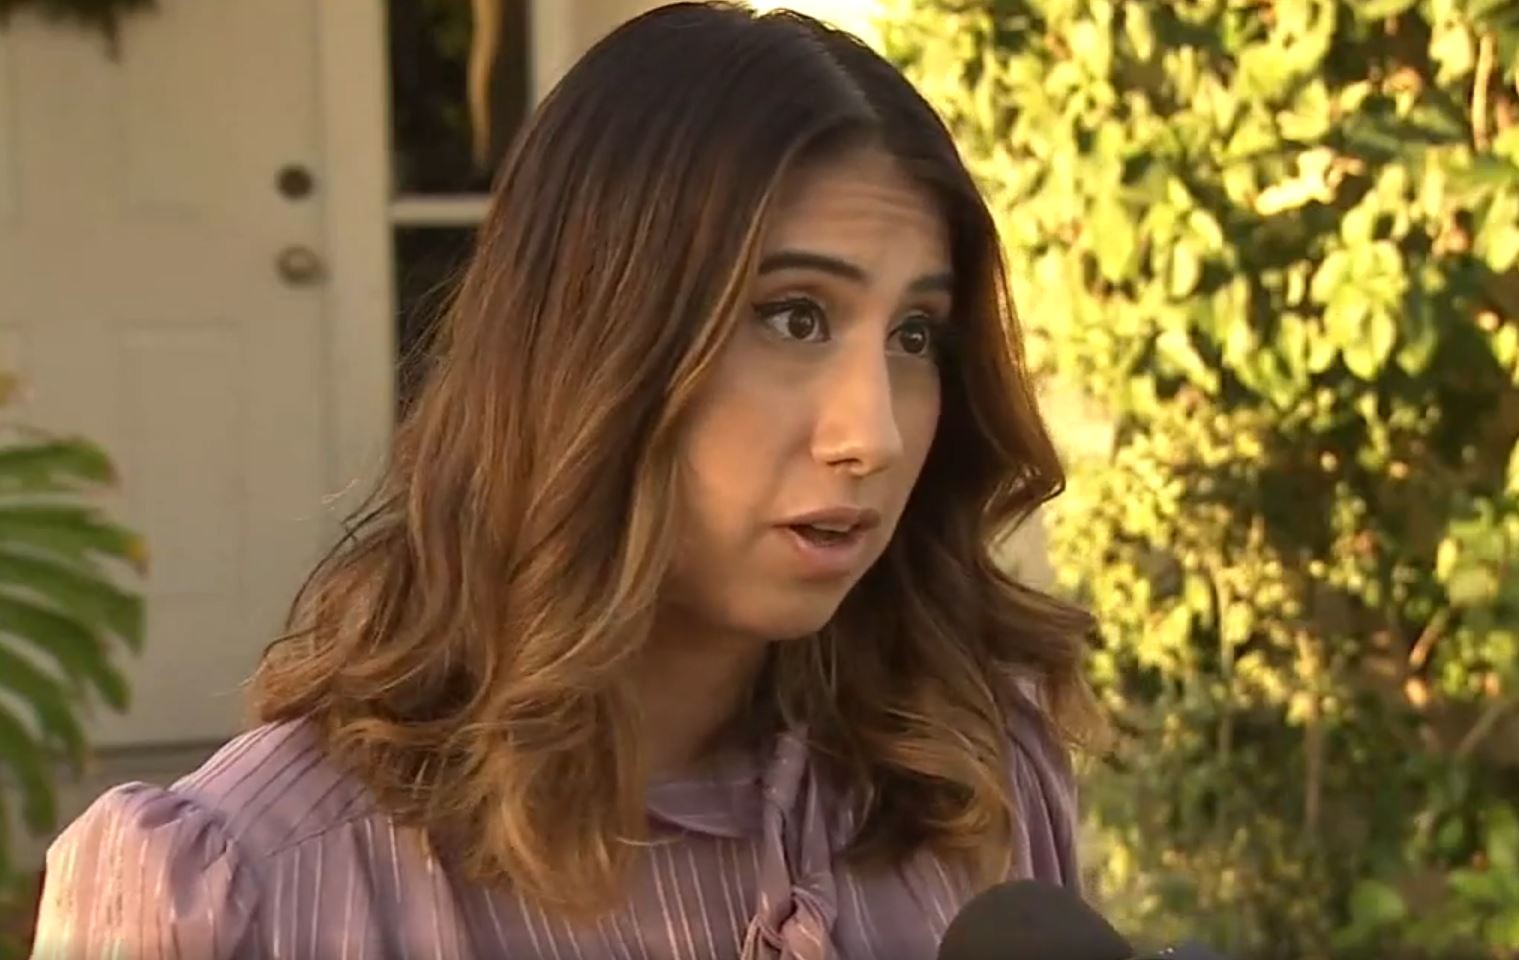 PHOTO: Natalie Garcia says ICE arrested her father without a warrant on Sunday, citing a nearly 20-year-old offense the he thought was settled.